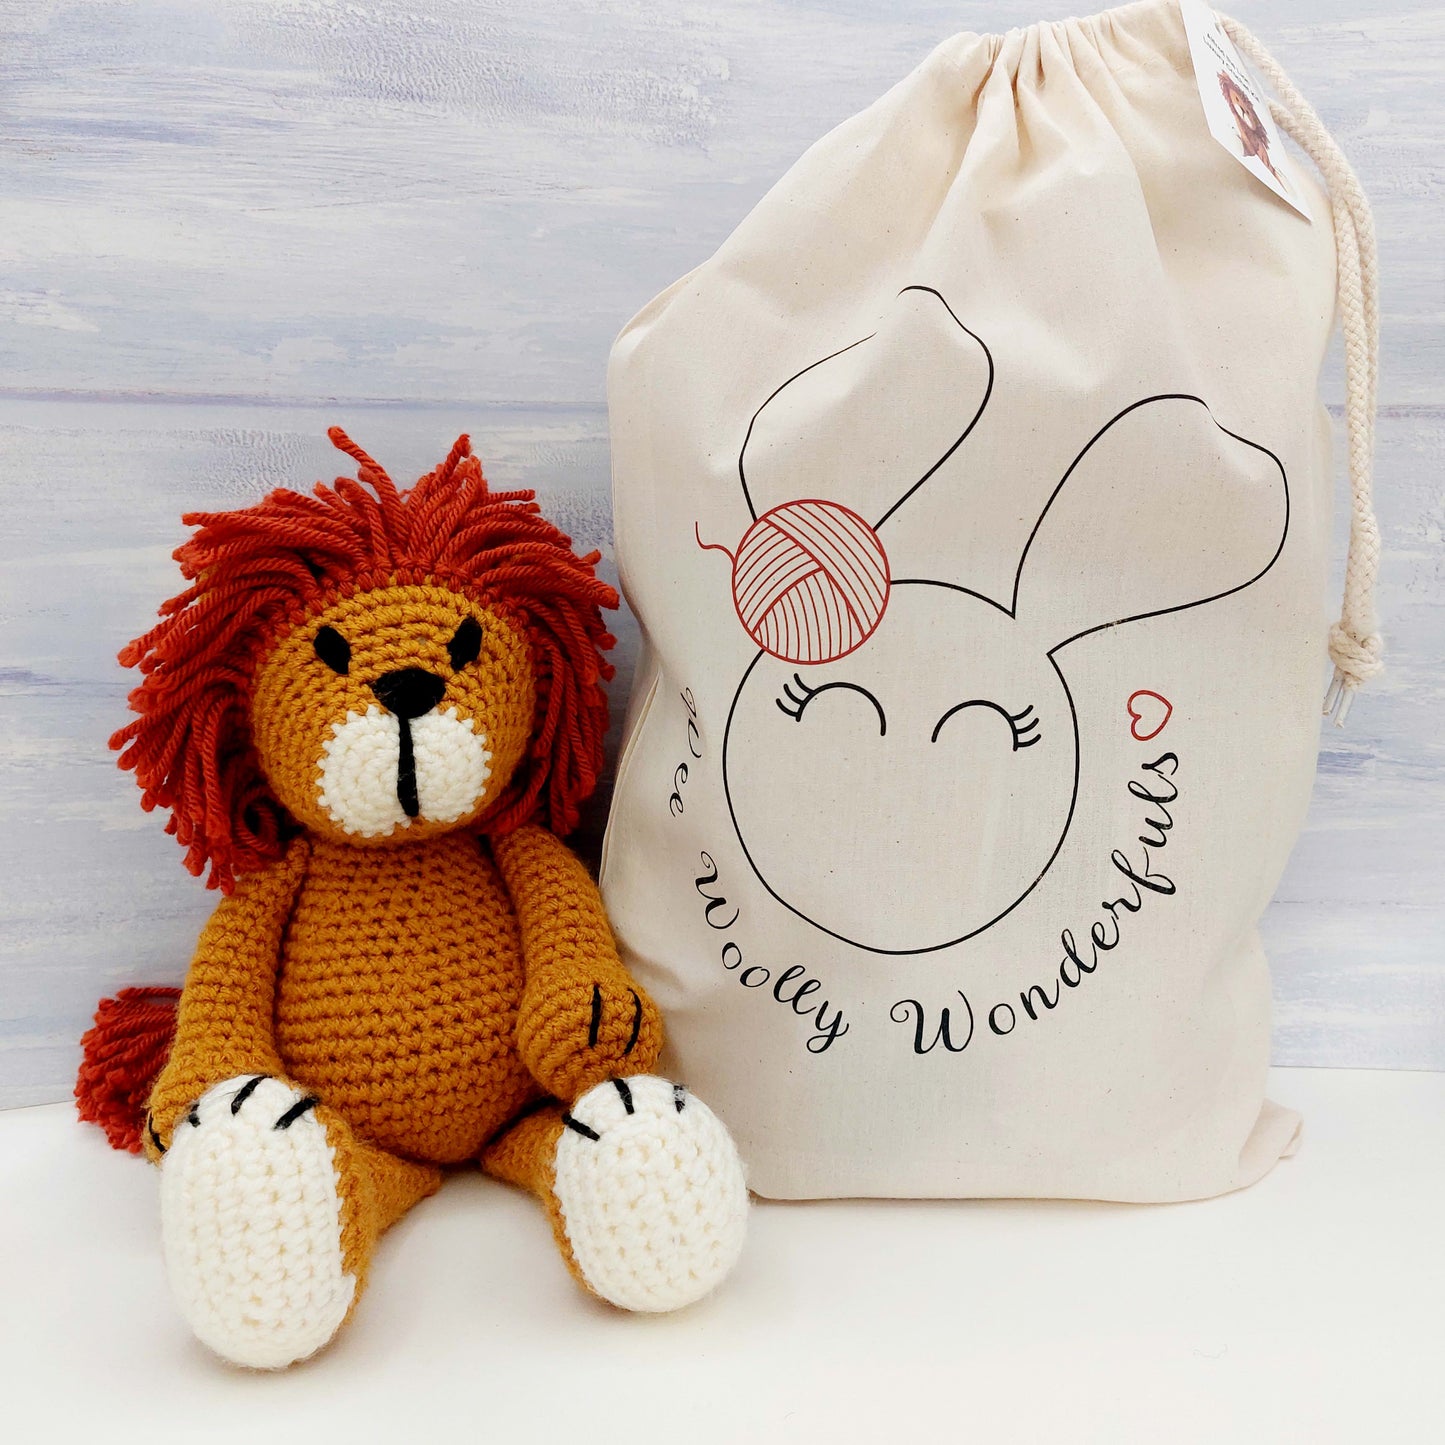 Lion Crochet Kit with Project Bag